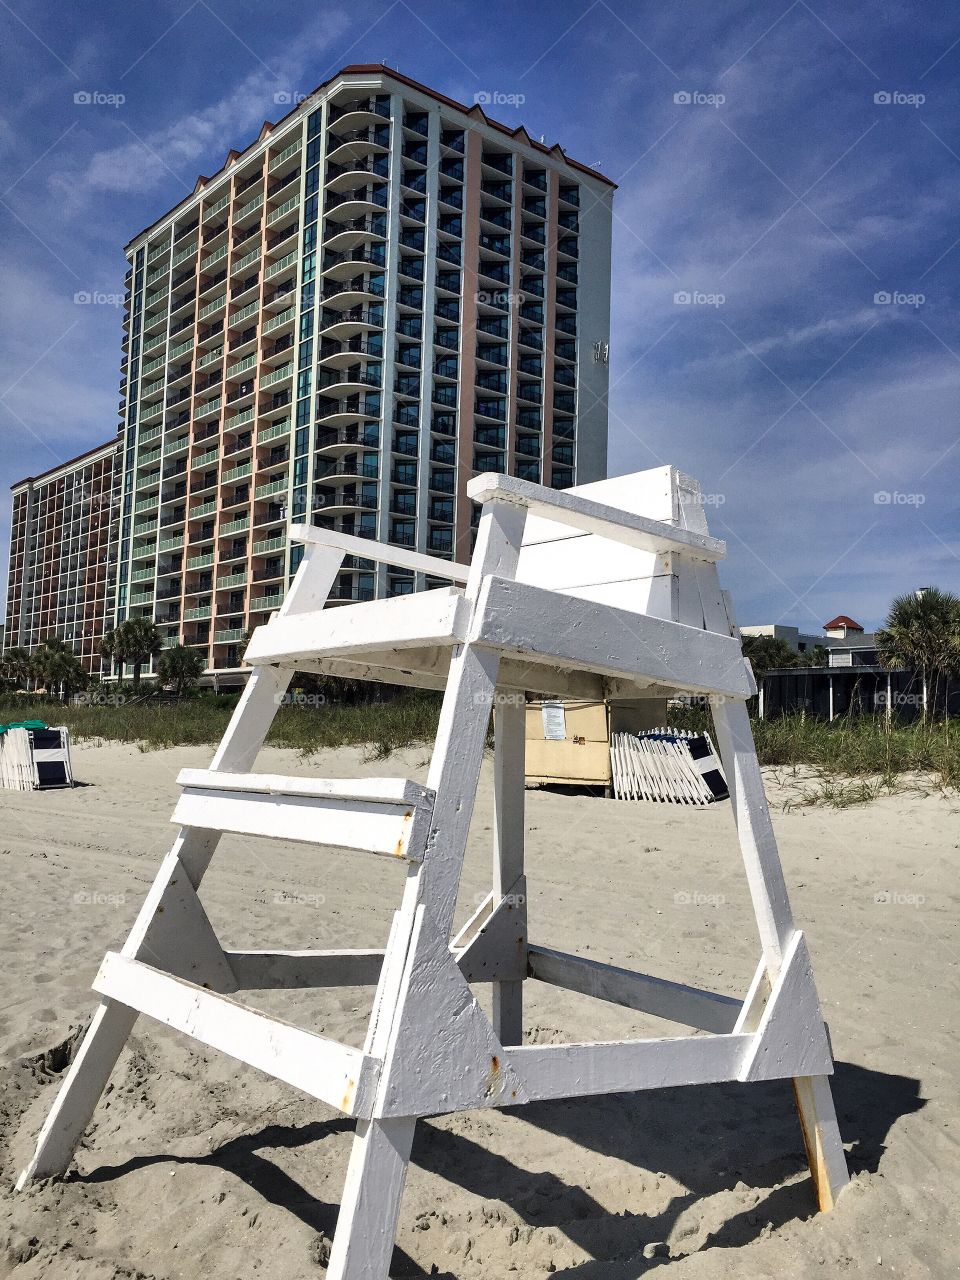 Beach. As summer comes to an end a empty lifeguard chair stands alone in Myrtle Beach South Carolina.